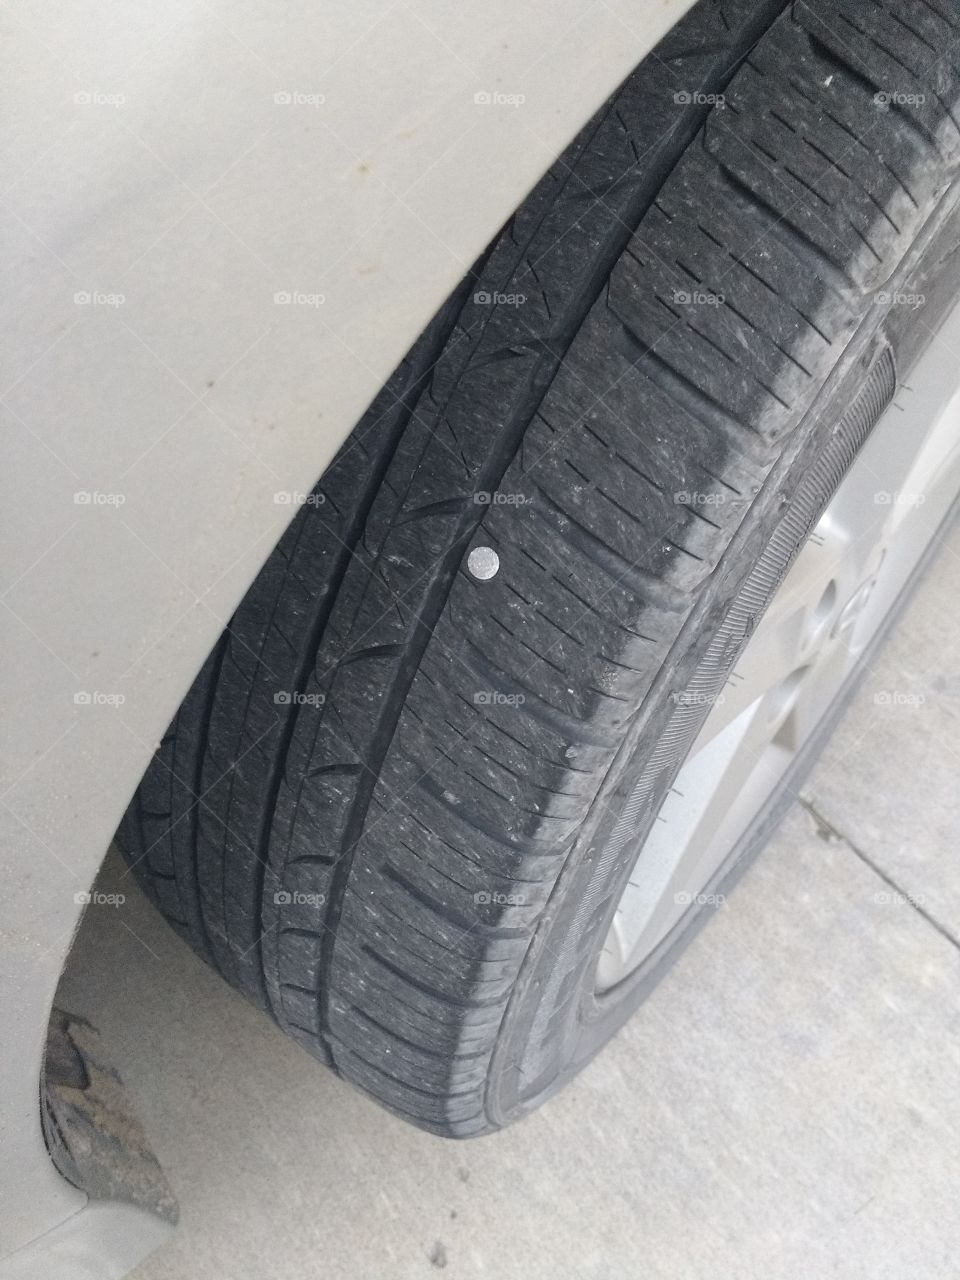 my tire with a nail in it. living near construction.